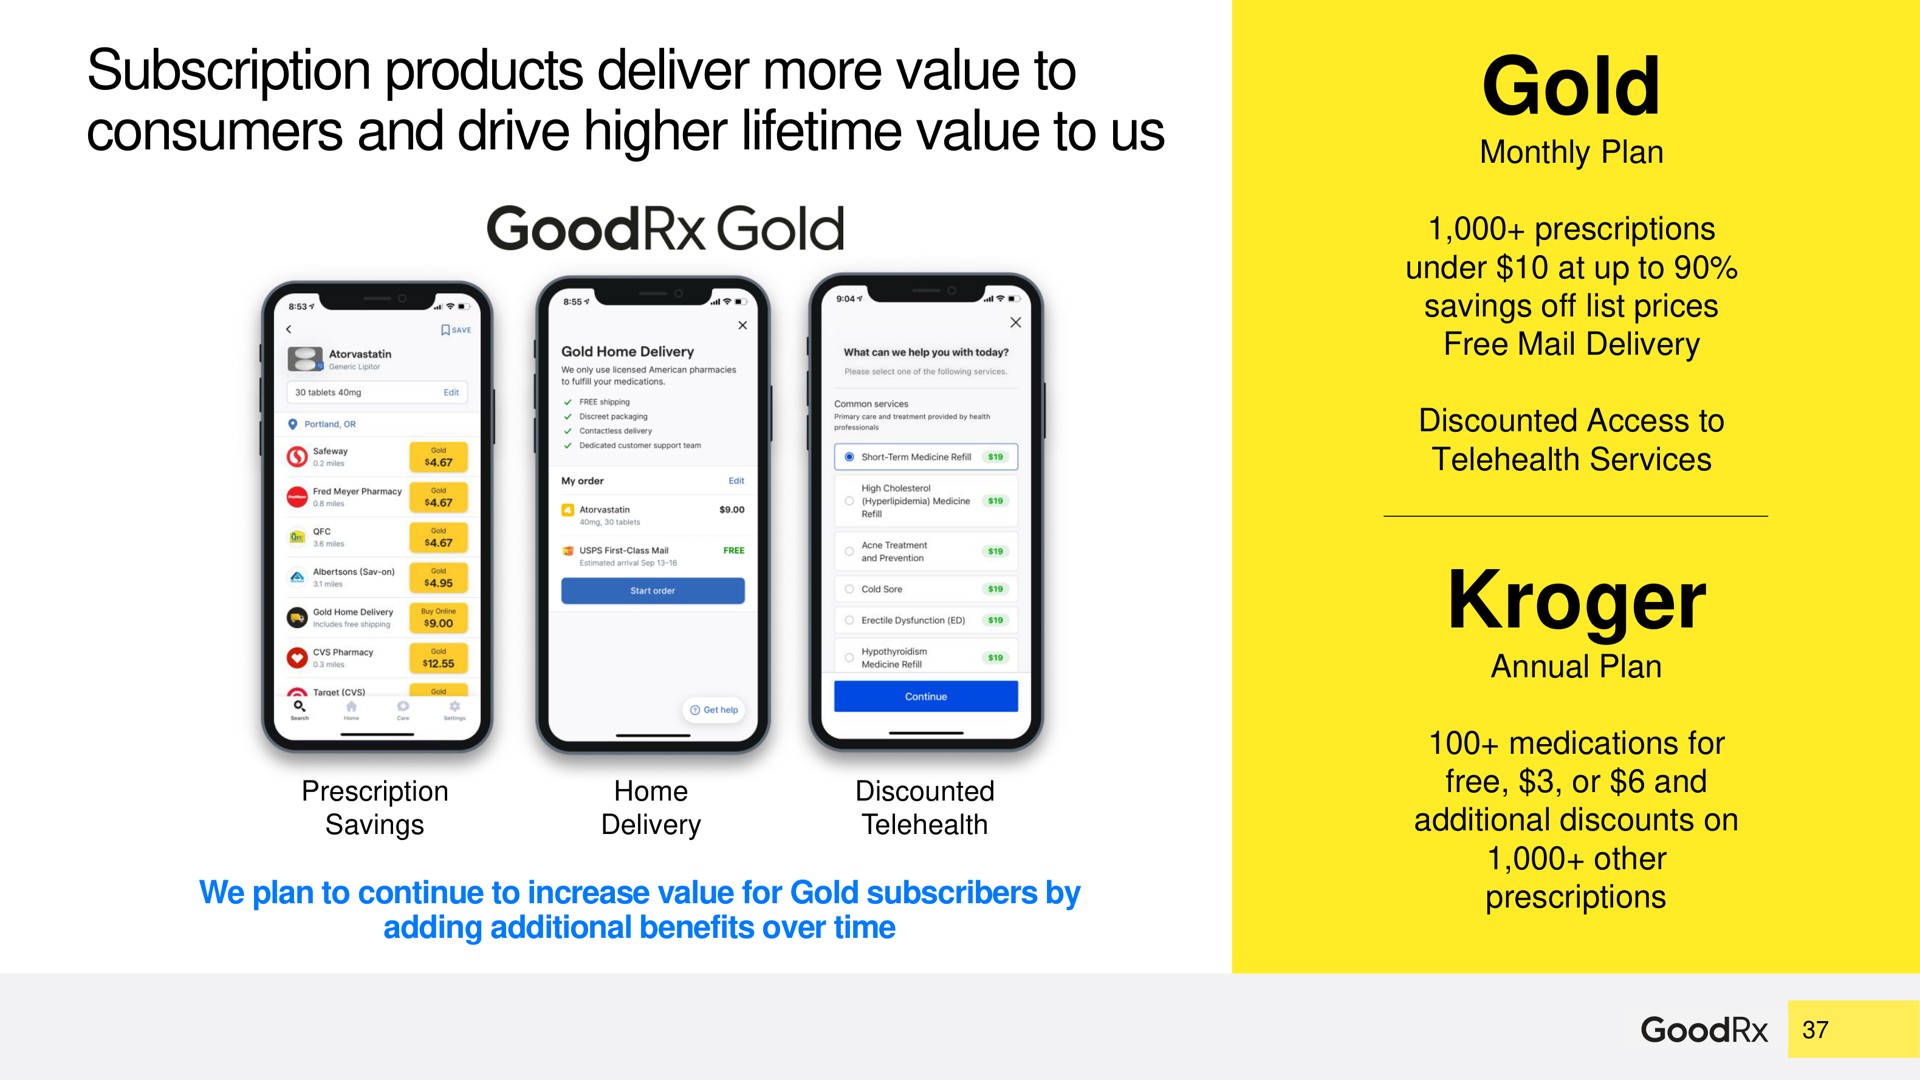 subscription products deliver more value to consumers and drive higher lifetime value to us gold | GoodRx